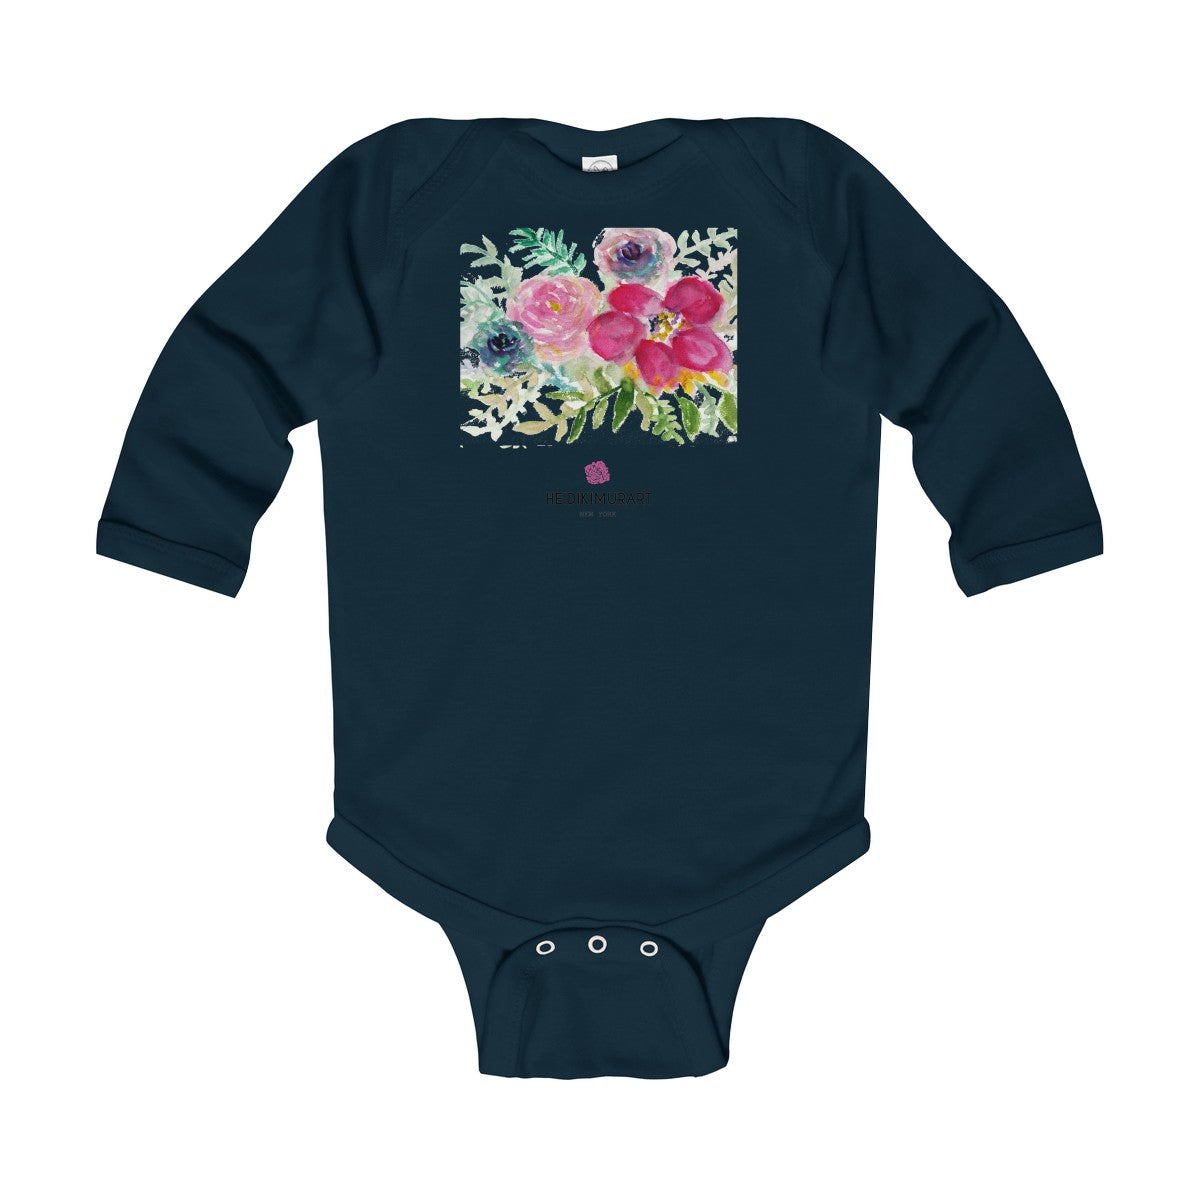 Red Hibiscus Floral Infant Baby's Long Sleeve Bodysuit - Made in UK (UK Size: 6M-24M)-Kids clothes-Navy-18M-Heidi Kimura Art LLC